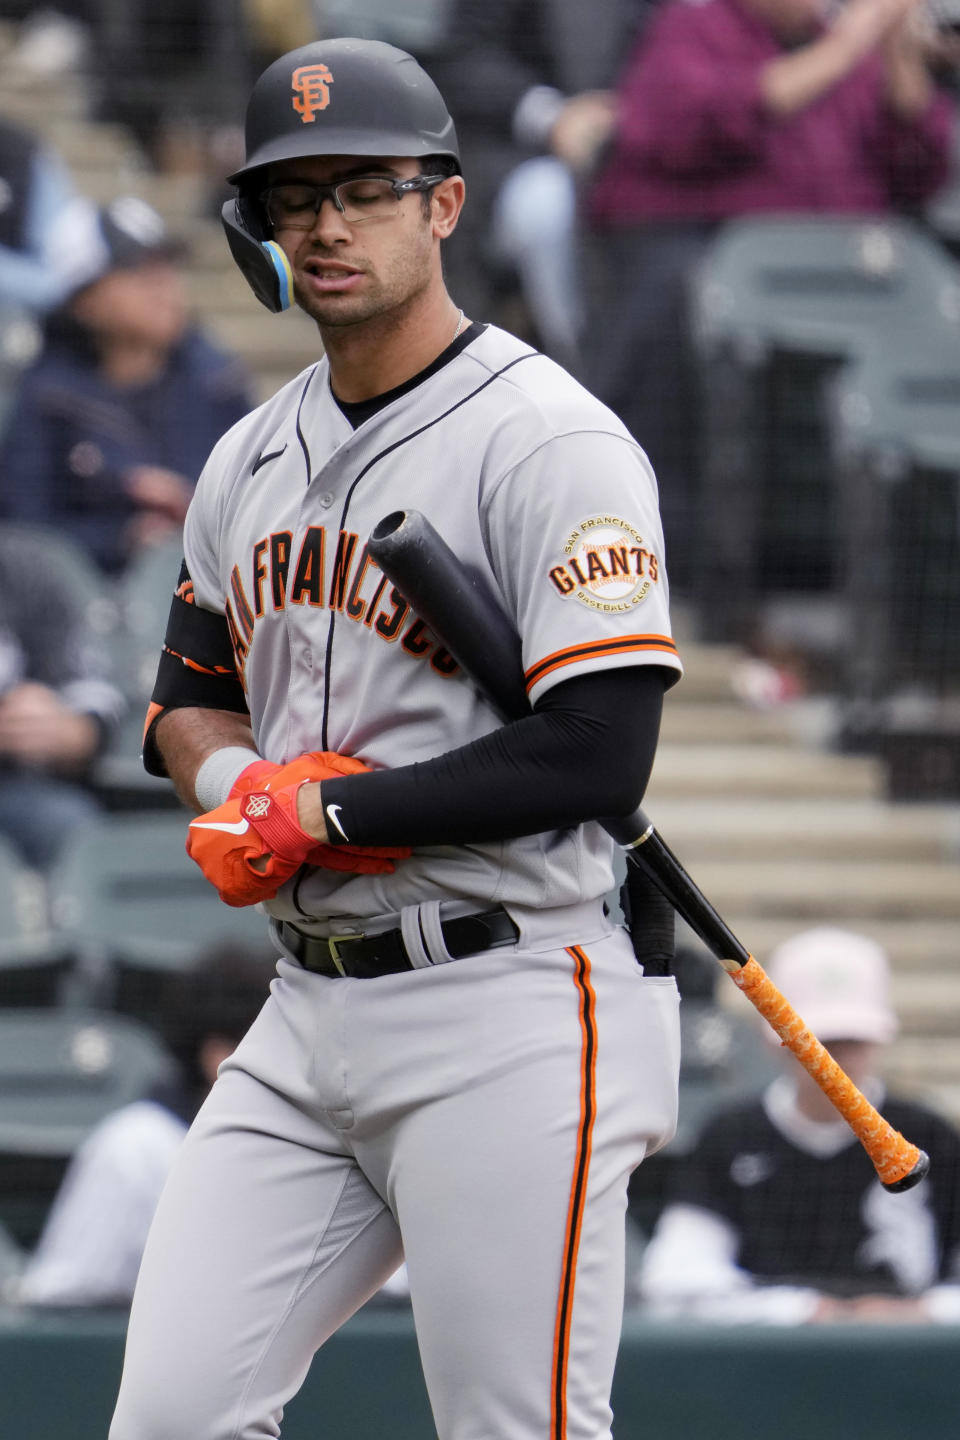 San Francisco Giants' Blake Sabol reacts after striking out swinging during the fourth inning of a baseball game against the Chicago White Sox in Chicago, Wednesday, April 5, 2023. (AP Photo/Nam Y. Huh)